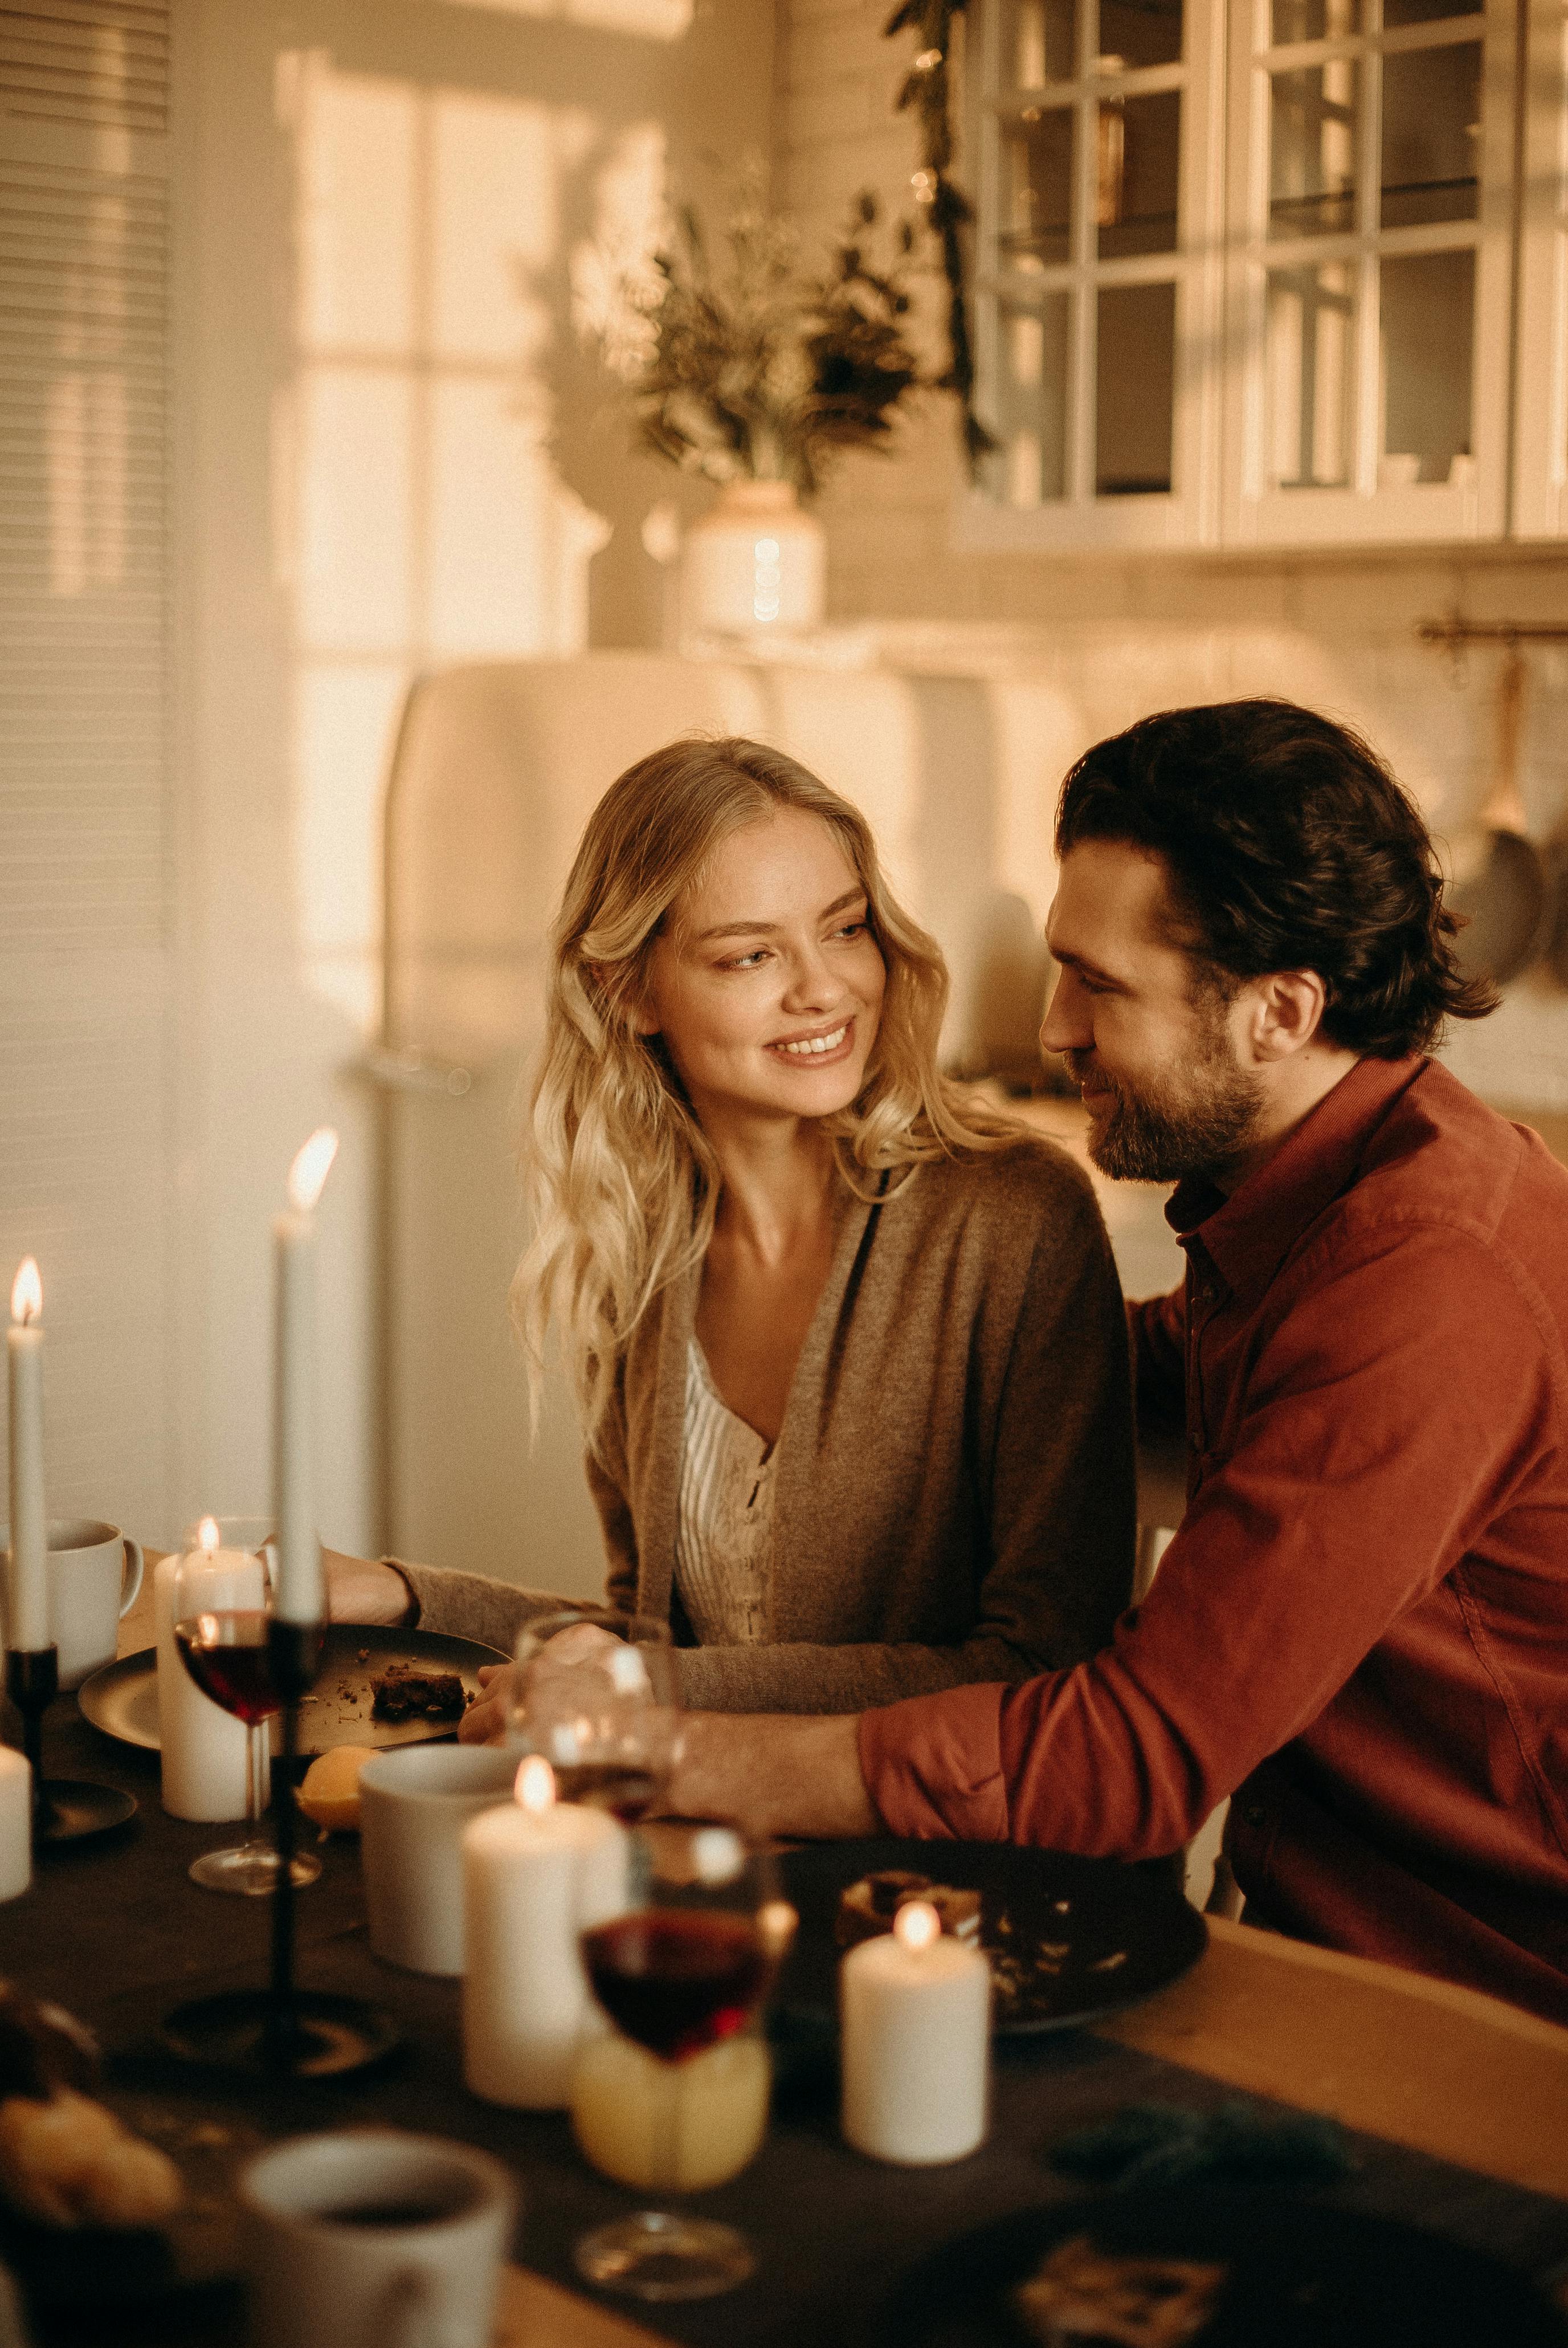 Two people flirting at a dinner table | Source: Pexels